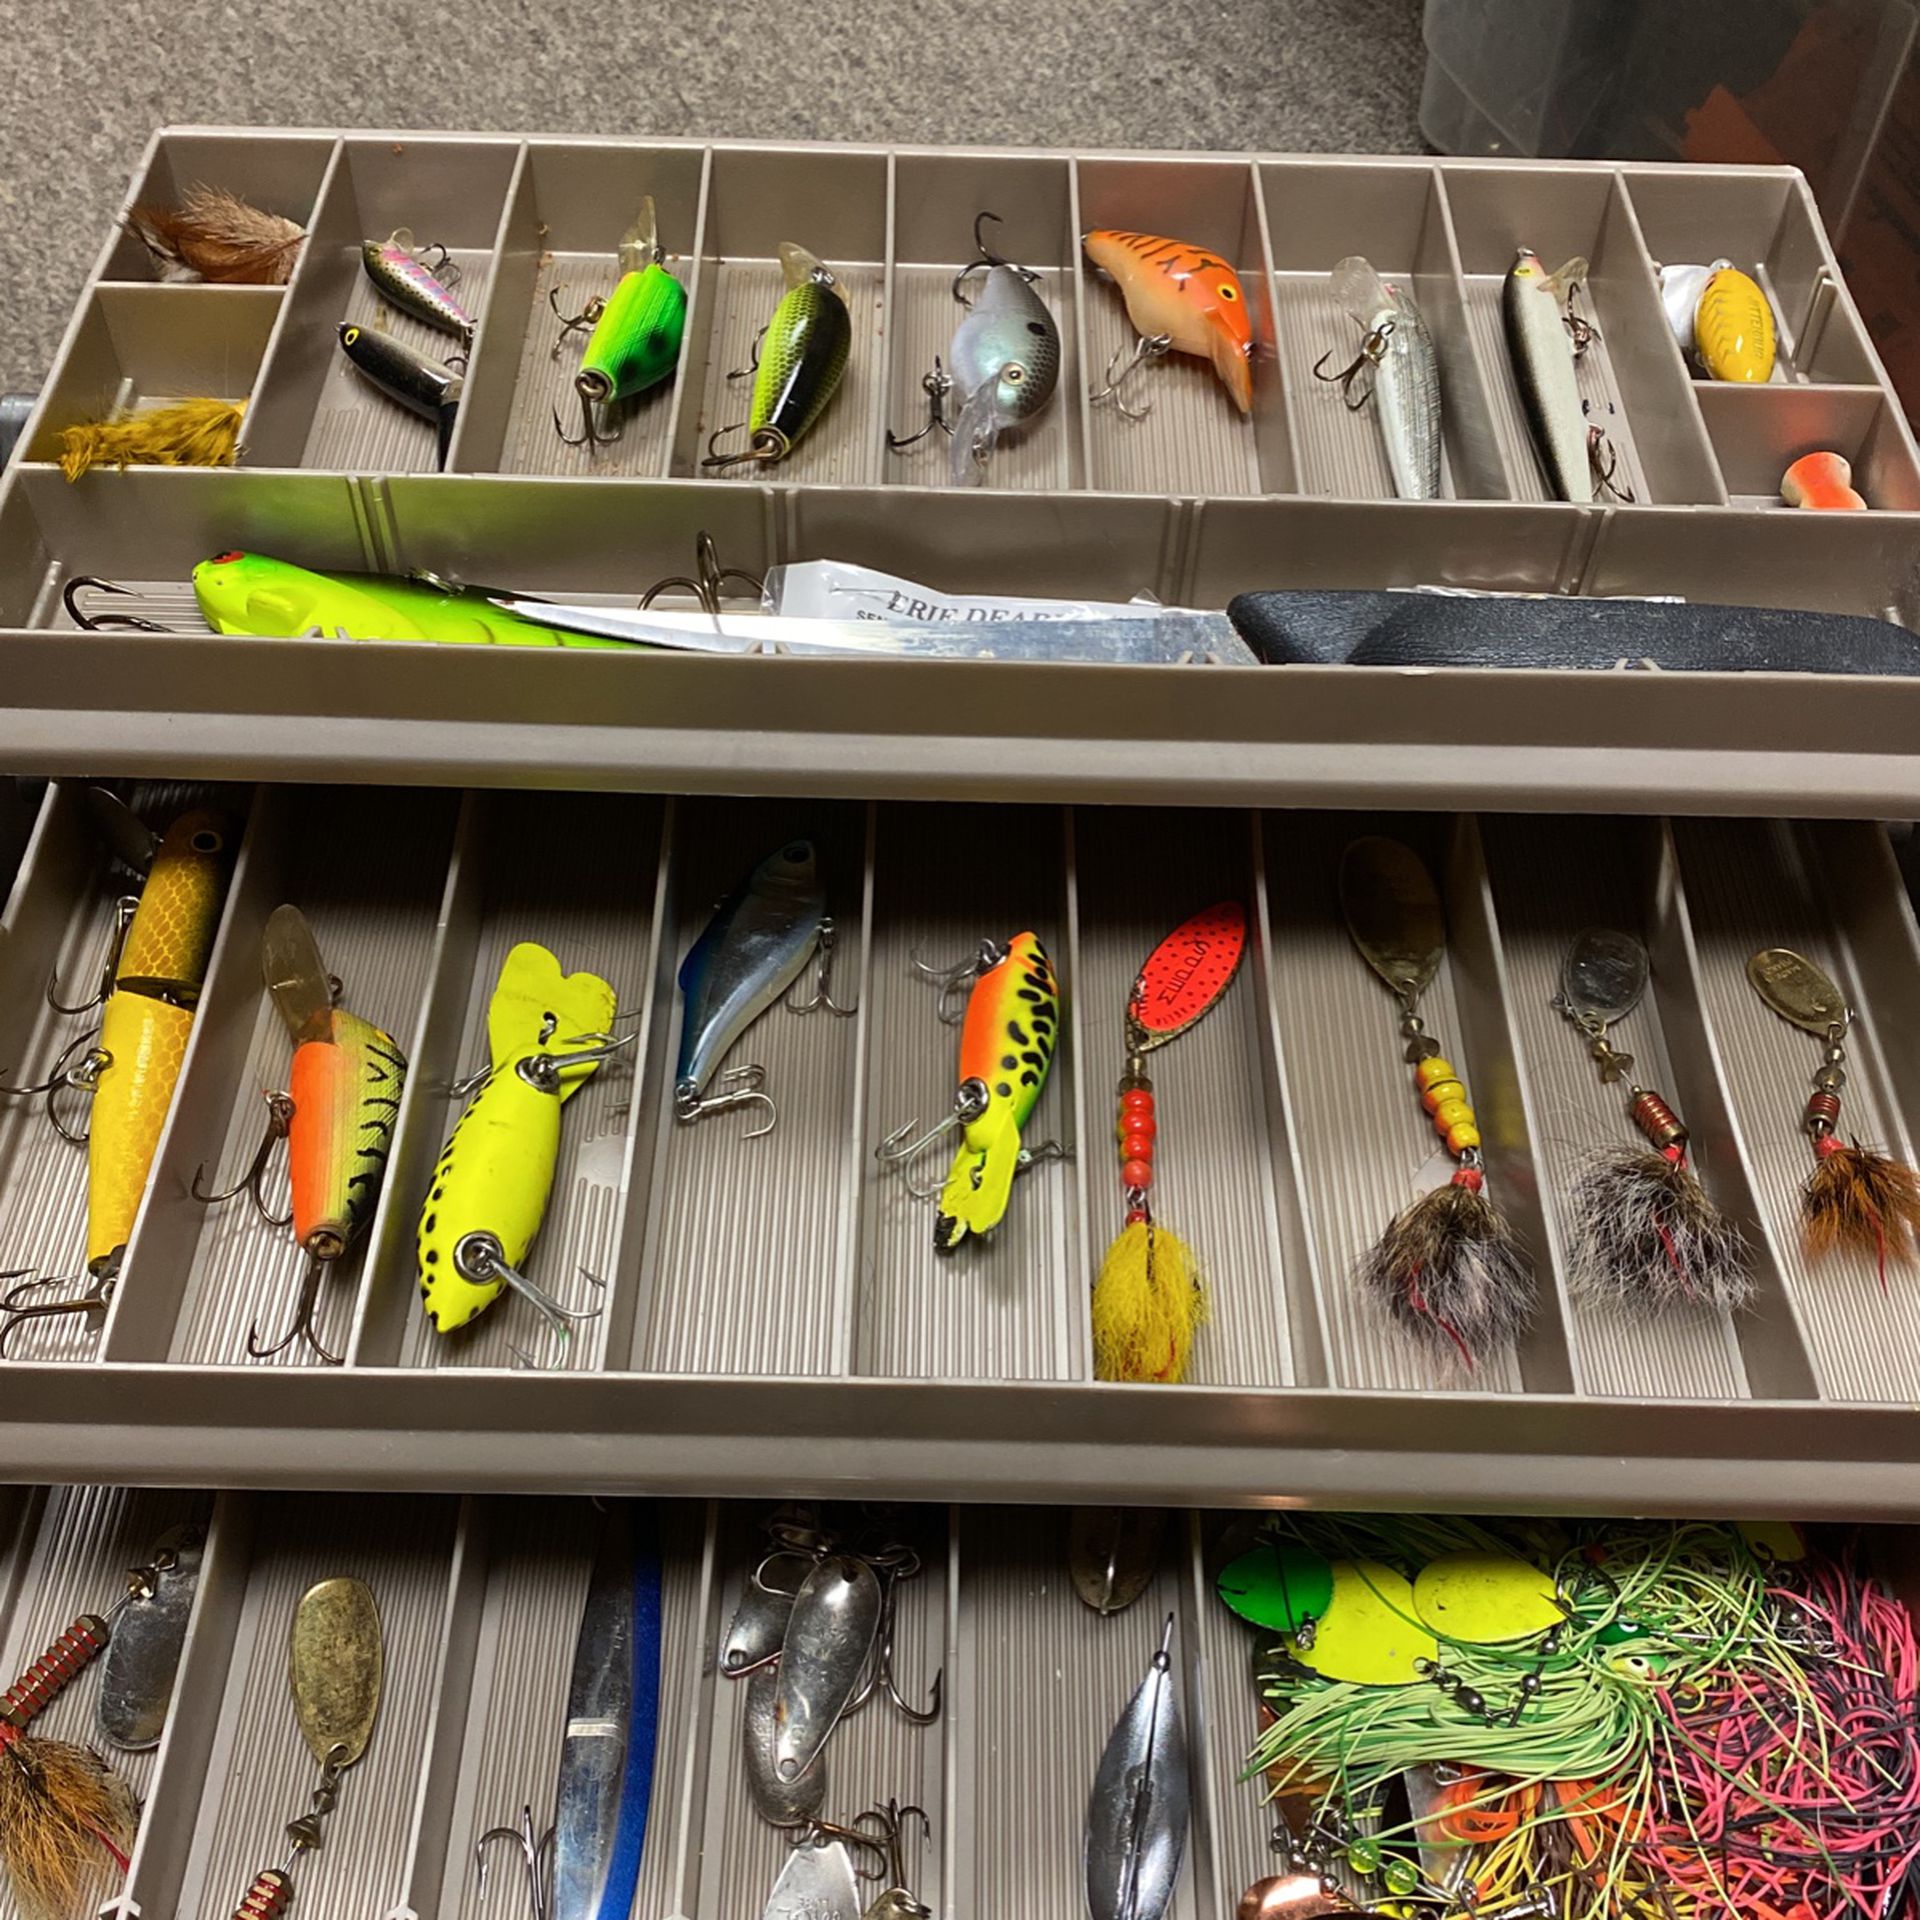 Large tackle Box for Sale in Tempe, AZ - OfferUp